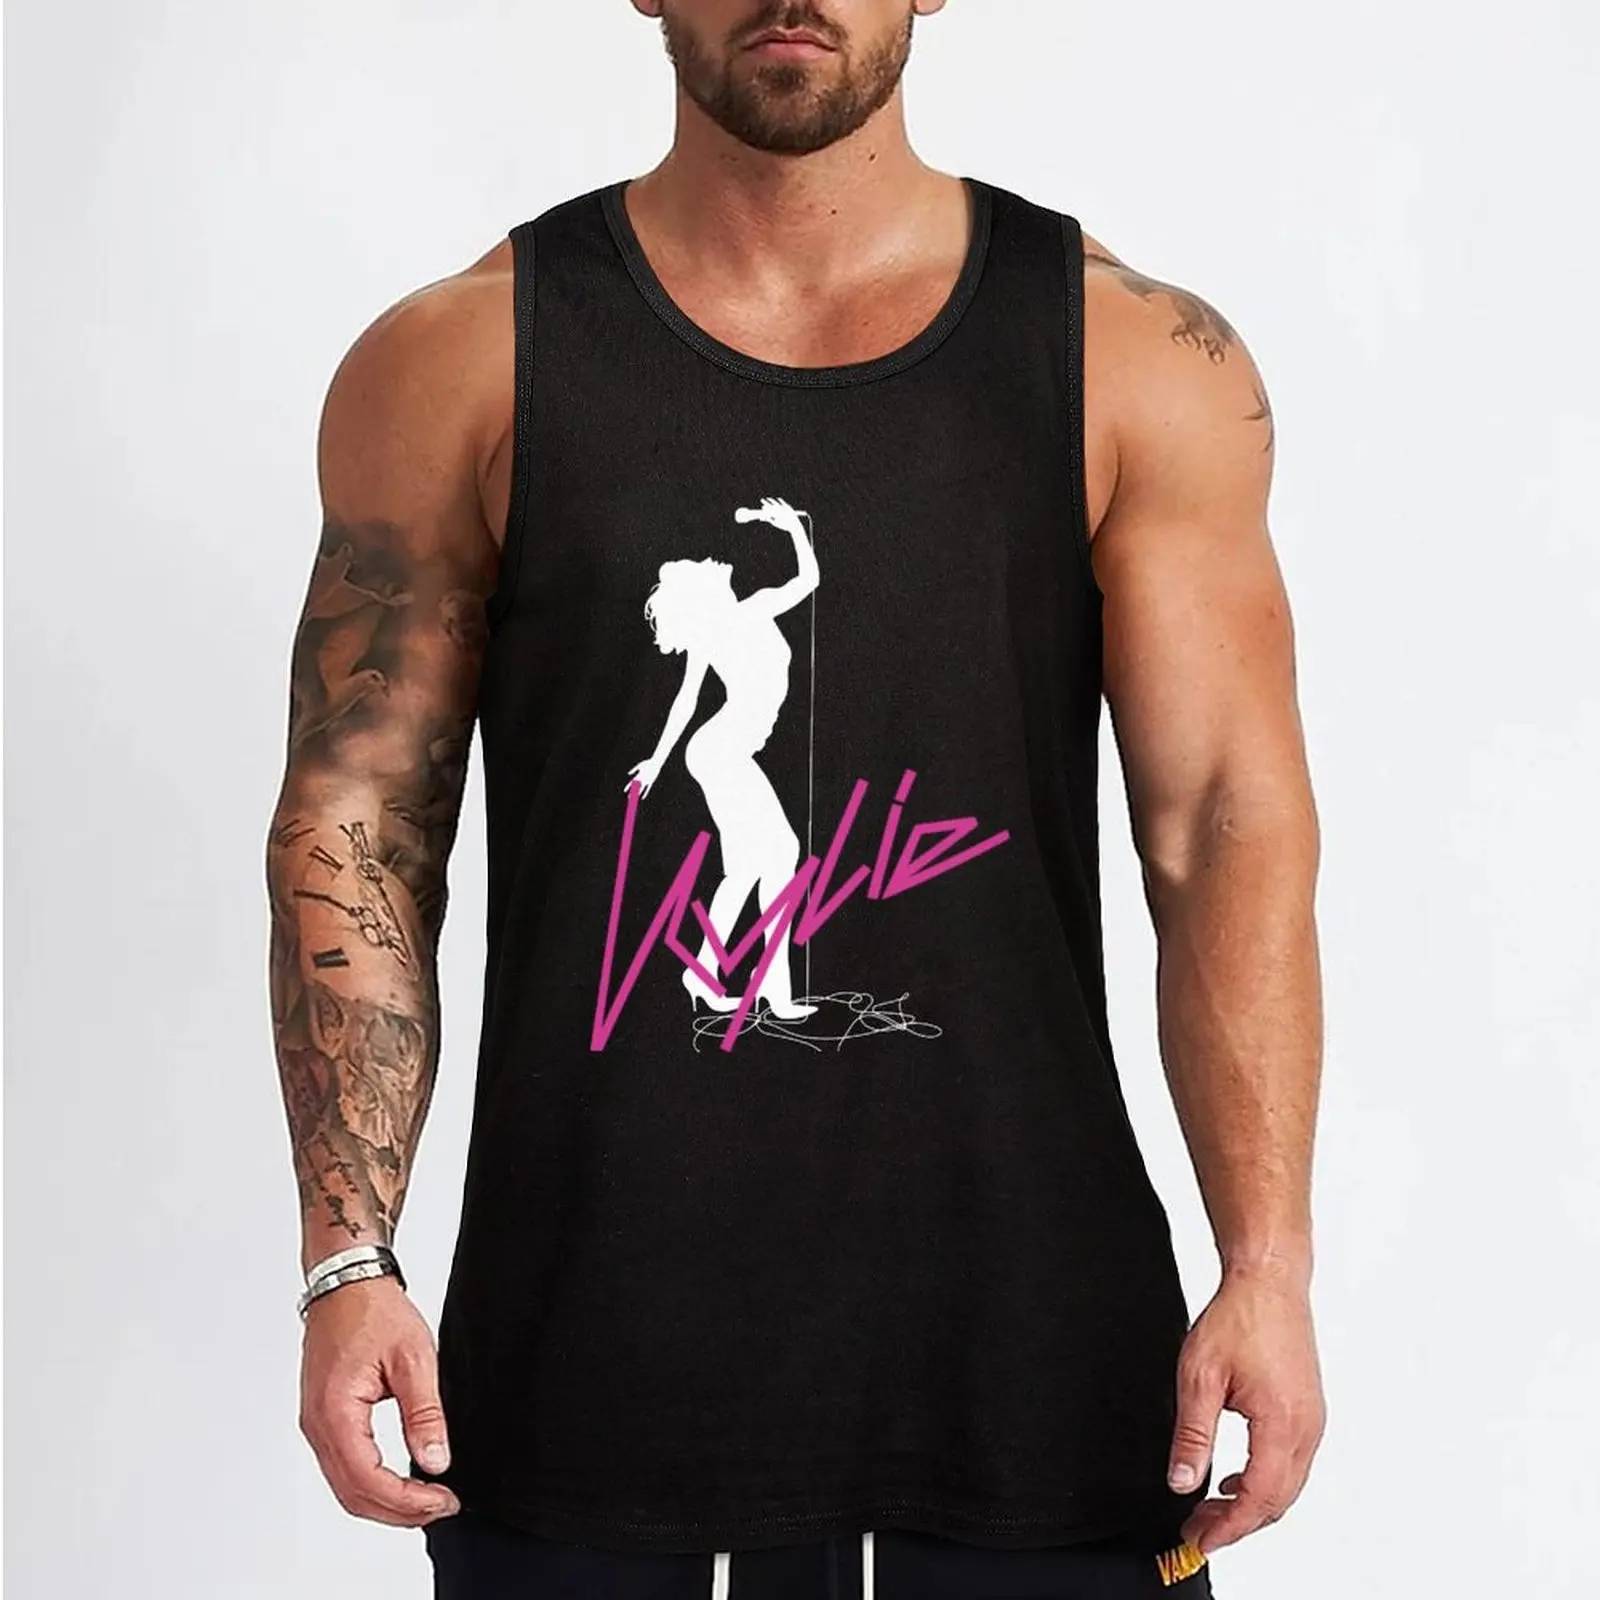 New Kylie Minogue Fever 20th Anniversary White Silhouette with Logo Tank Top Clothing Men's gym articles